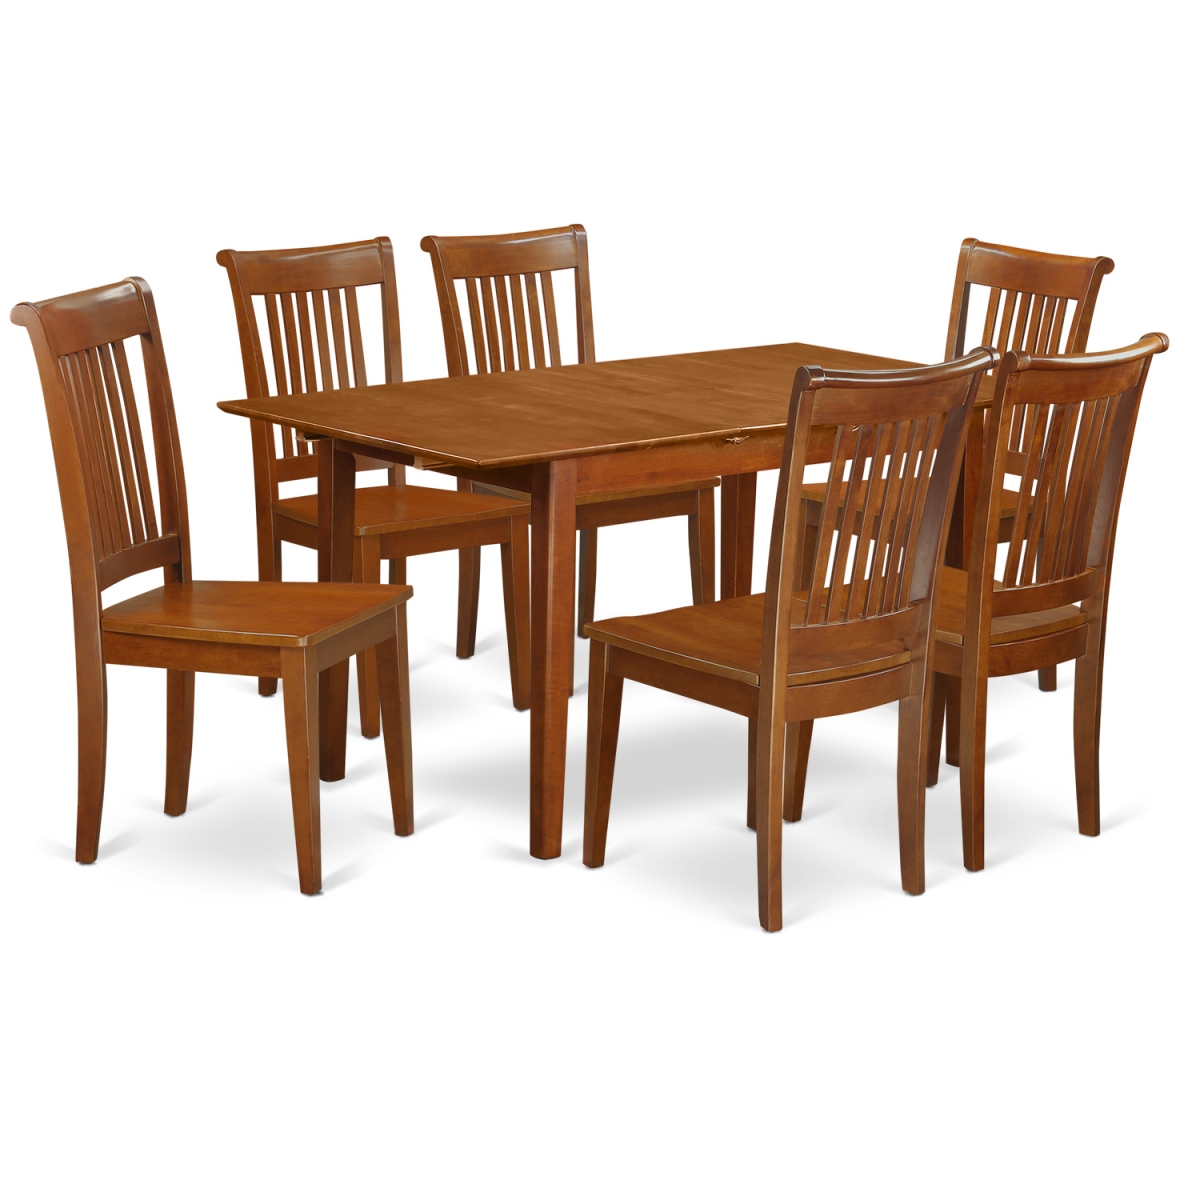 Picture of East West Furniture PSPO7-SBR-W Set Rectangular Kitchen Table with Leaf & 6 Wood Seat Chairs&#44; Saddle Brown - 12 in. - 7 Piece